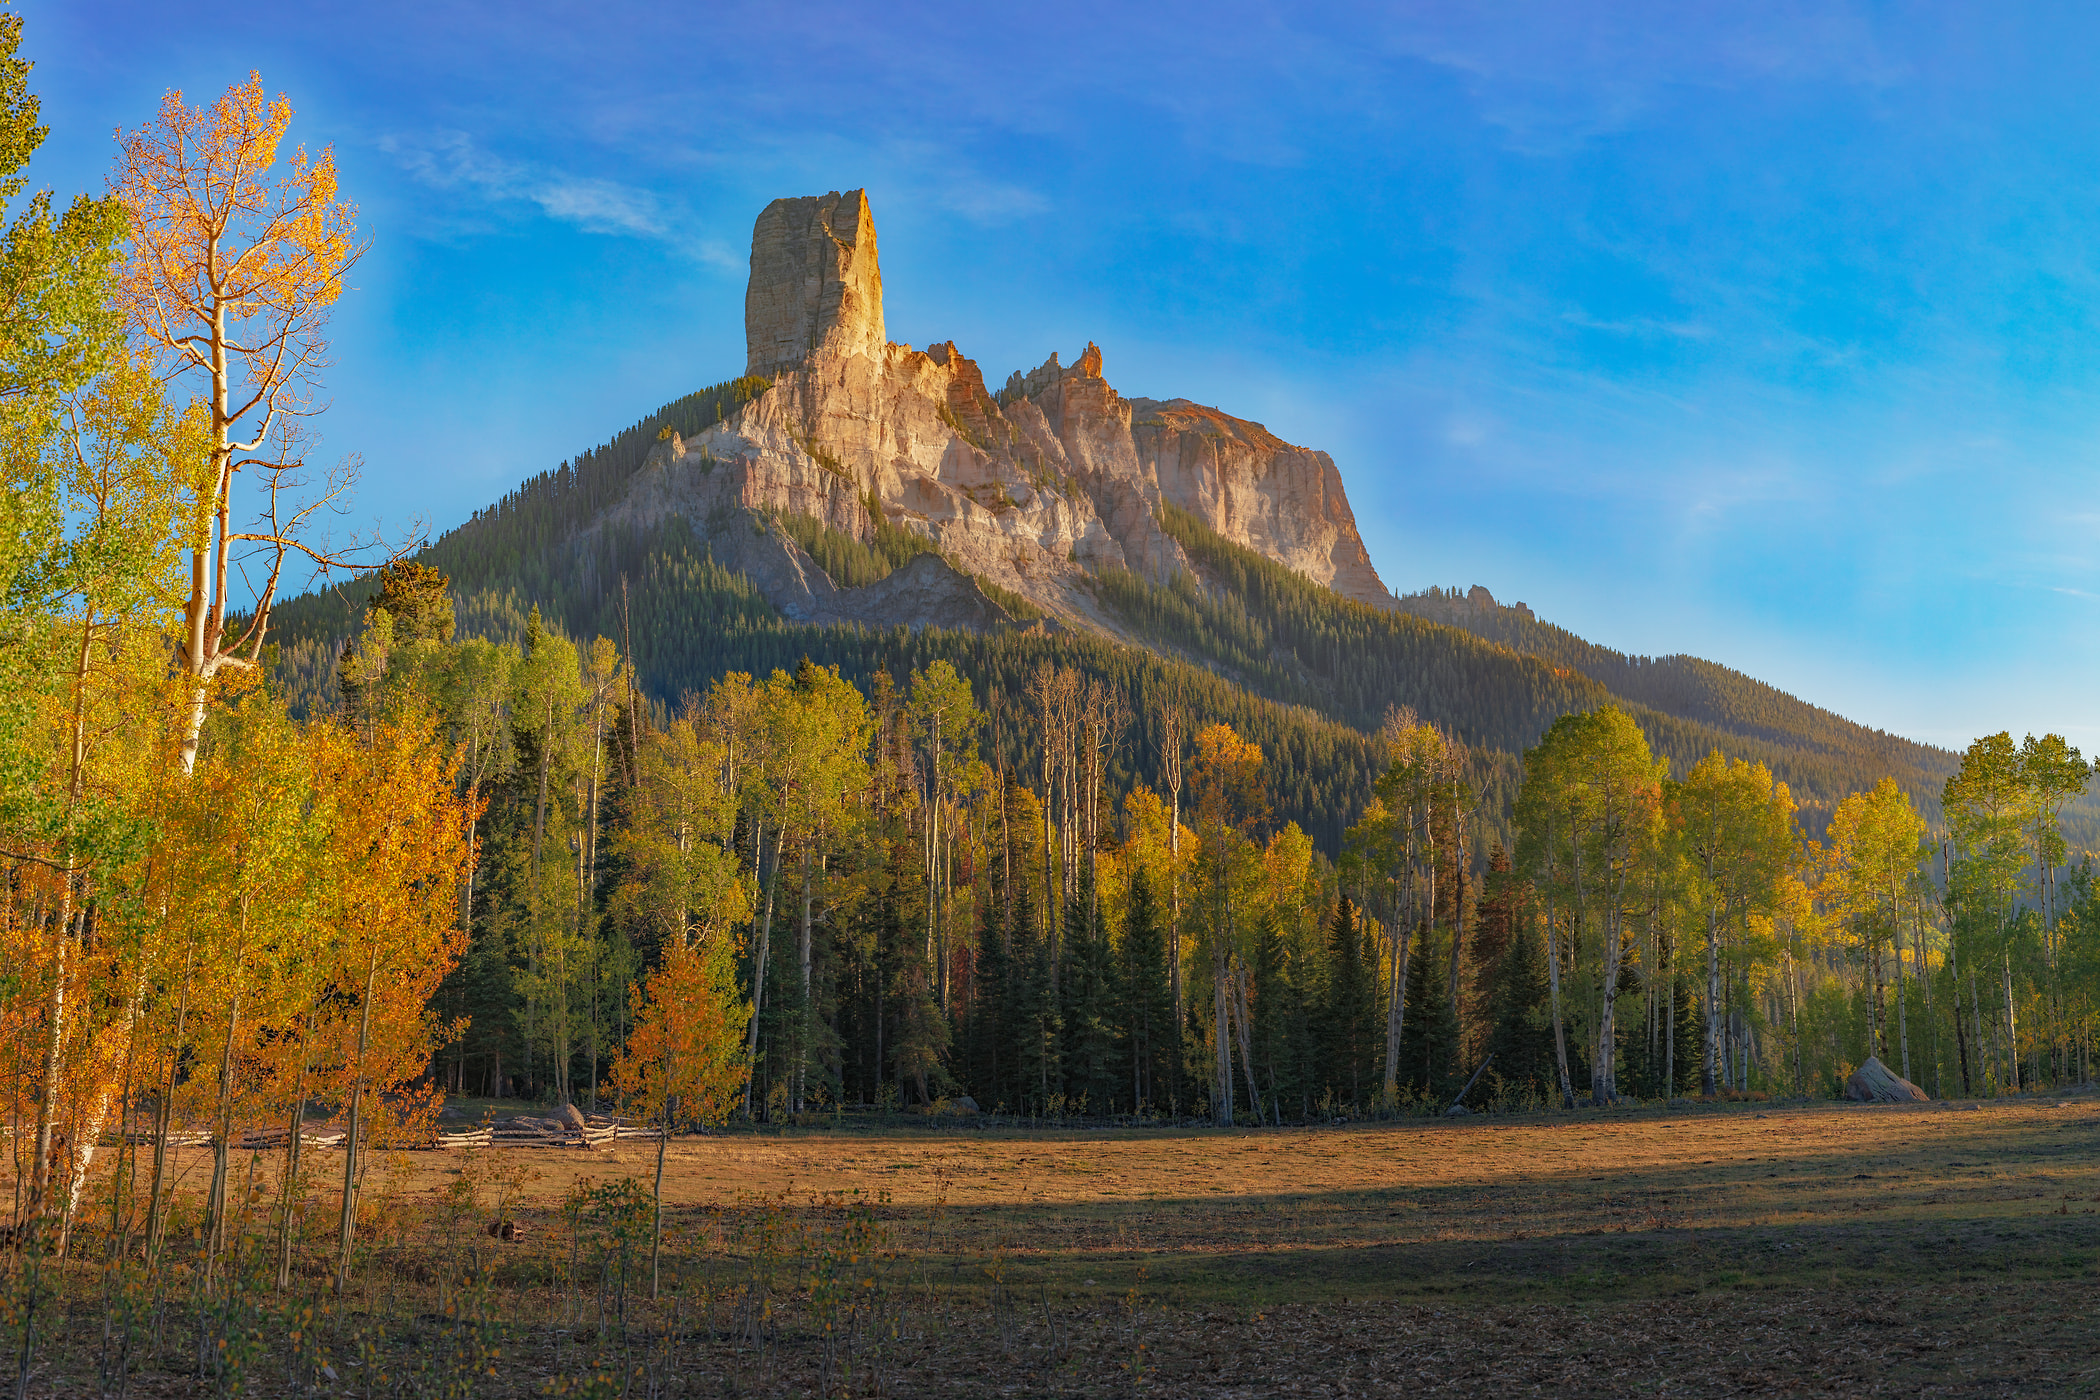 1,015 megapixels! A very high resolution, wall art photo of a mountain at sunset with autumn trees in the foreground; landscape photograph created by John Freeman in Deb's Meadow,  Cimarron Ridge, San Juan Mountains, Colorado.